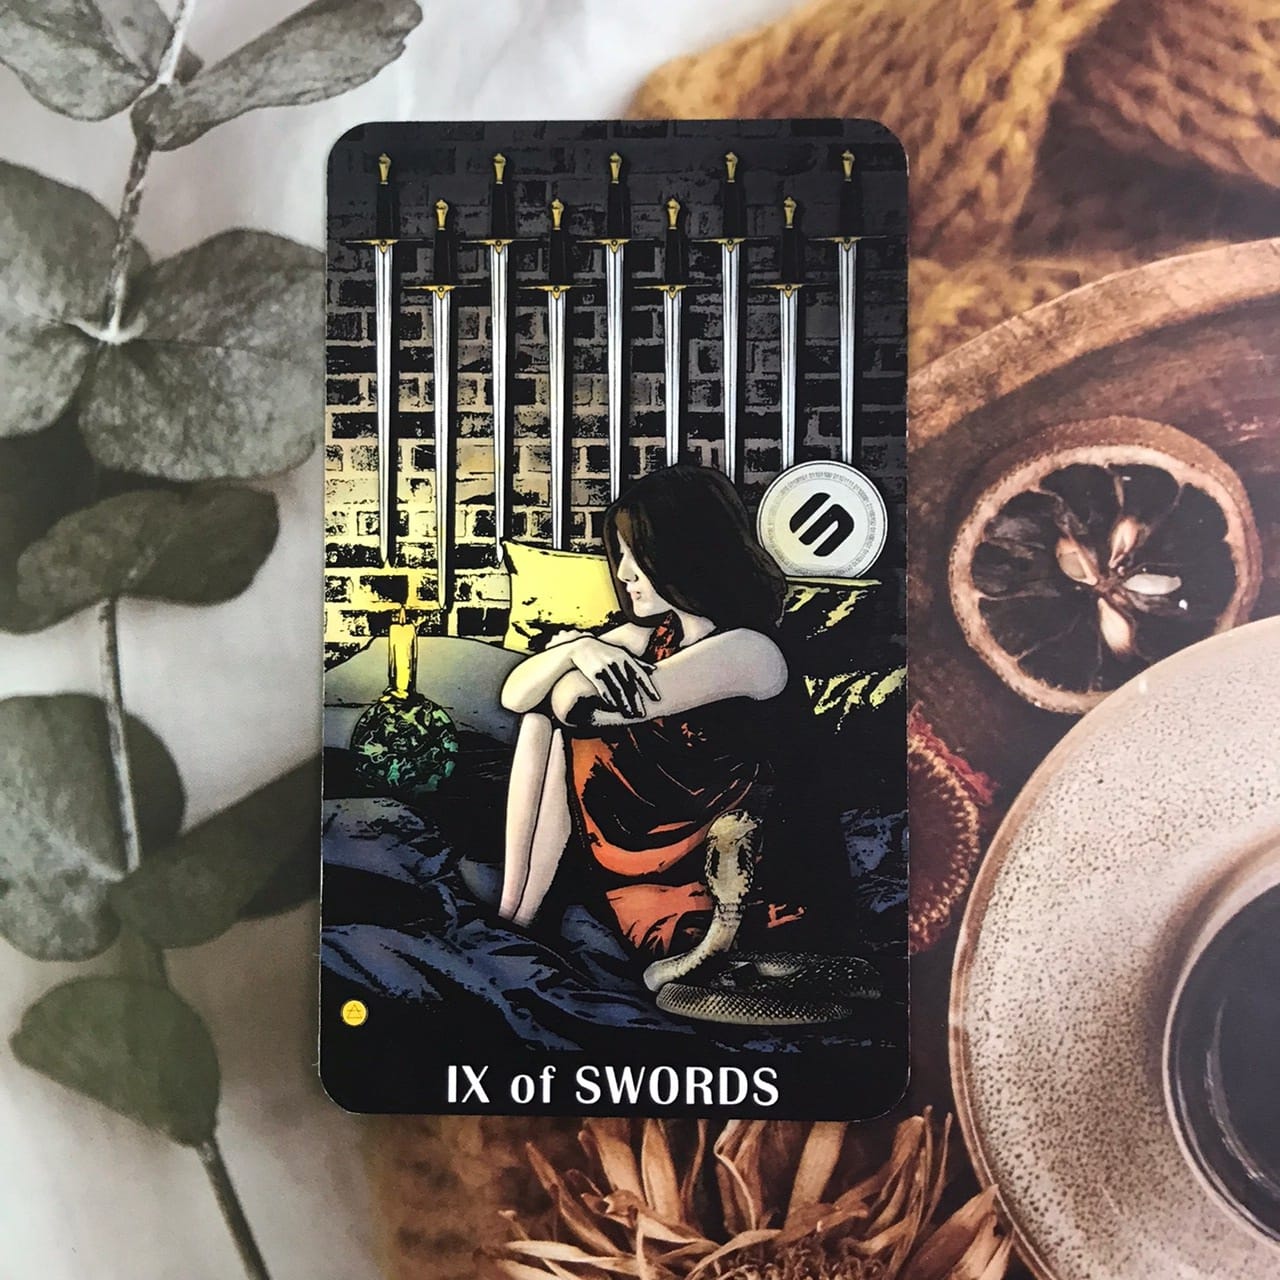 Nine of Swords Meaning